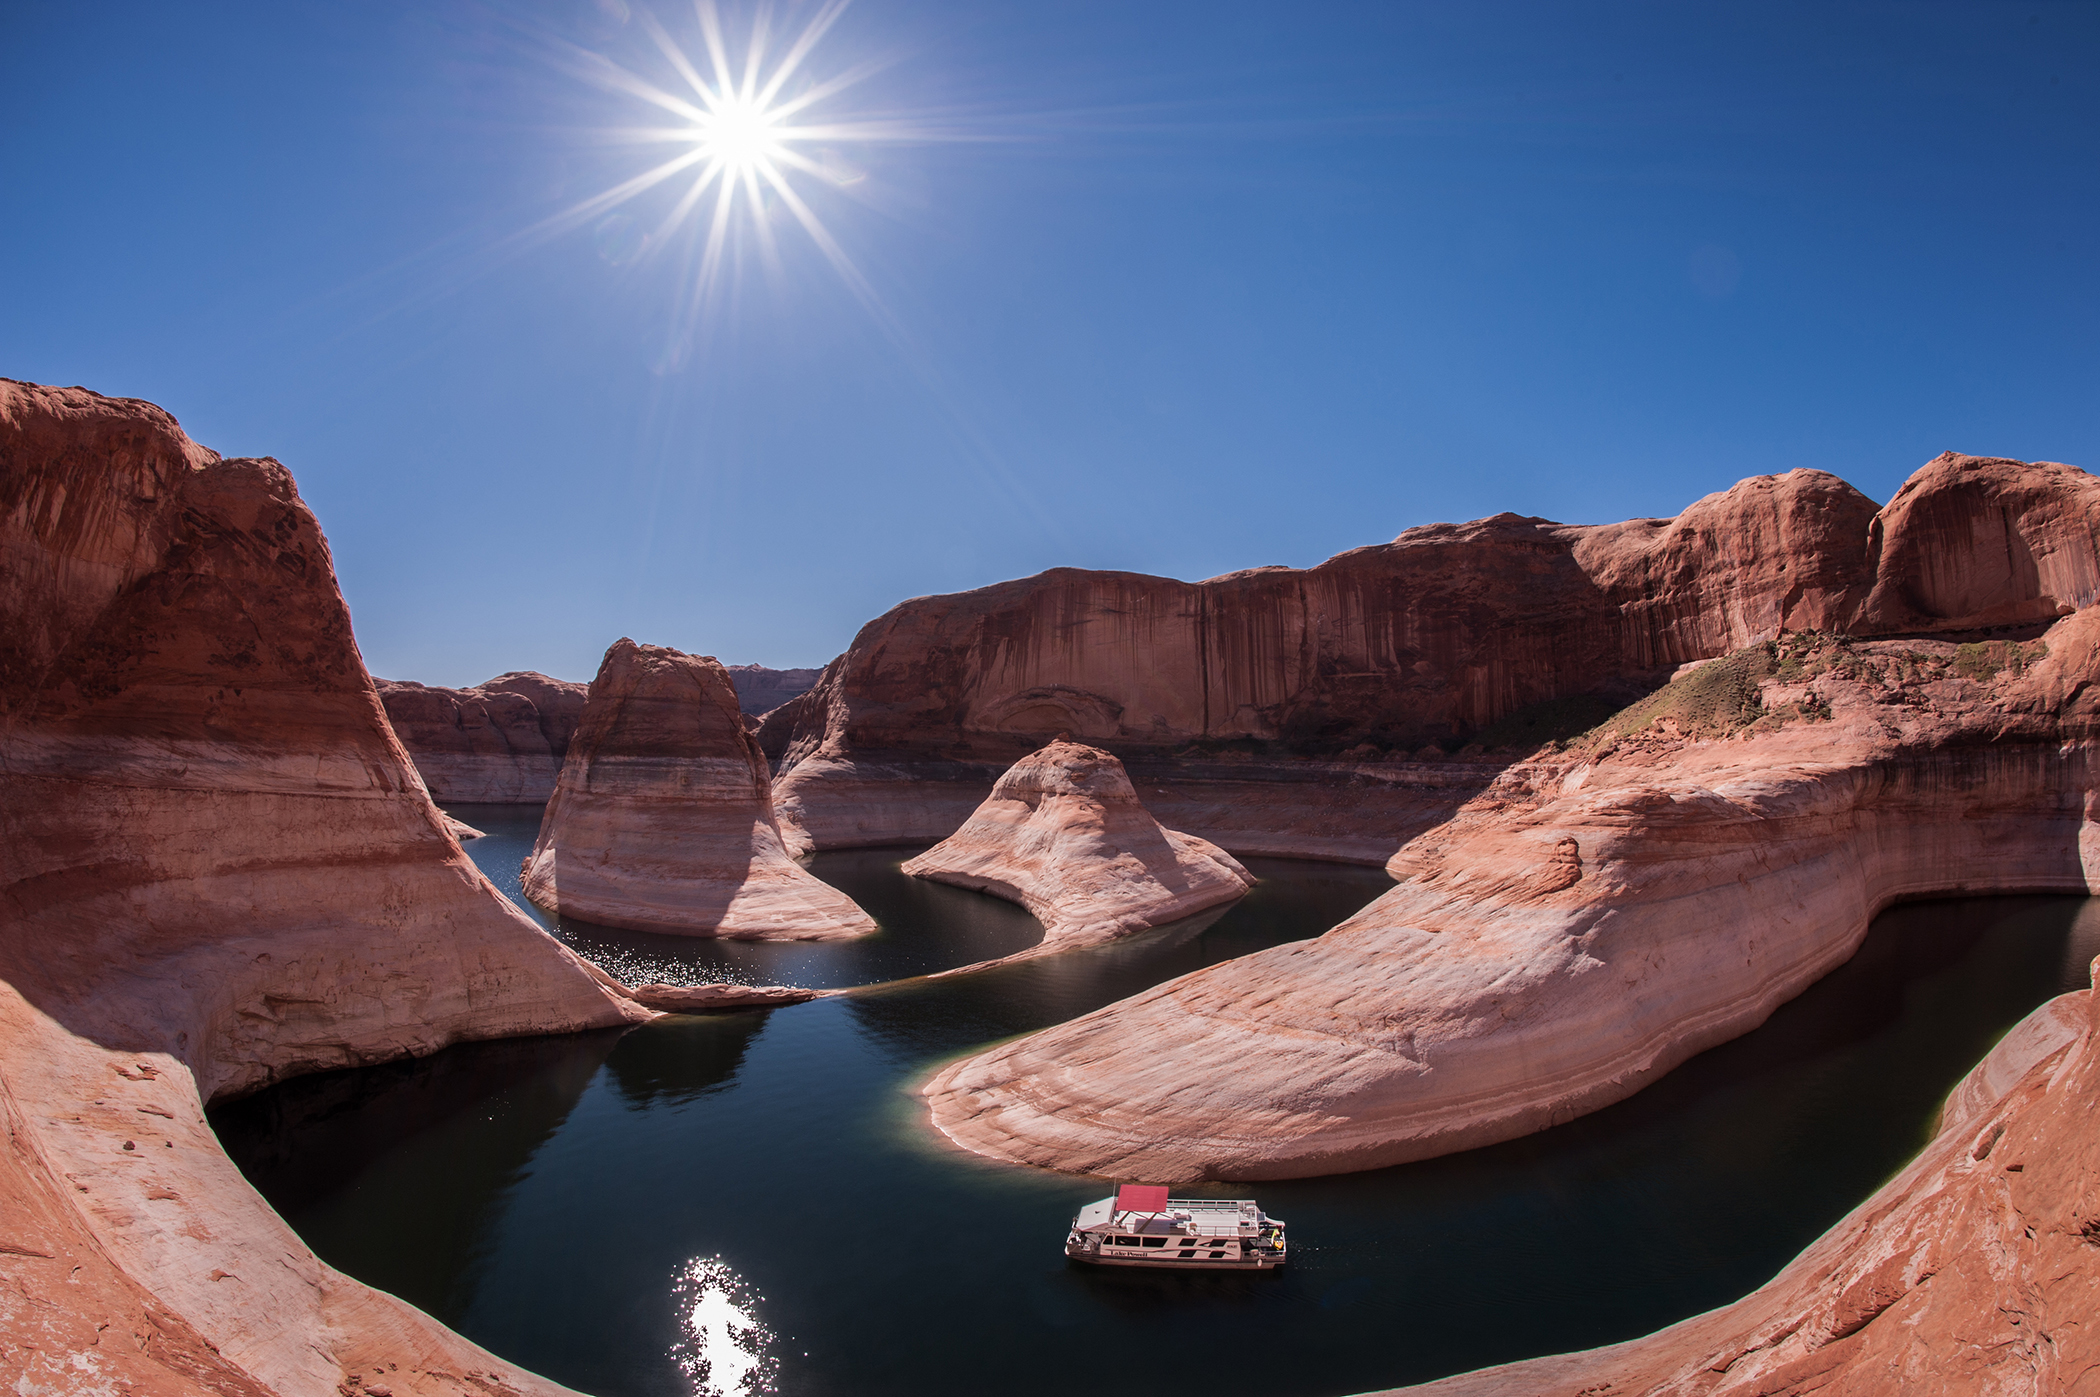  Photograph of Reflection Canyon in Lake Powell with a houseboat navigating the curves of entrenched meanders among steep cliffs. 